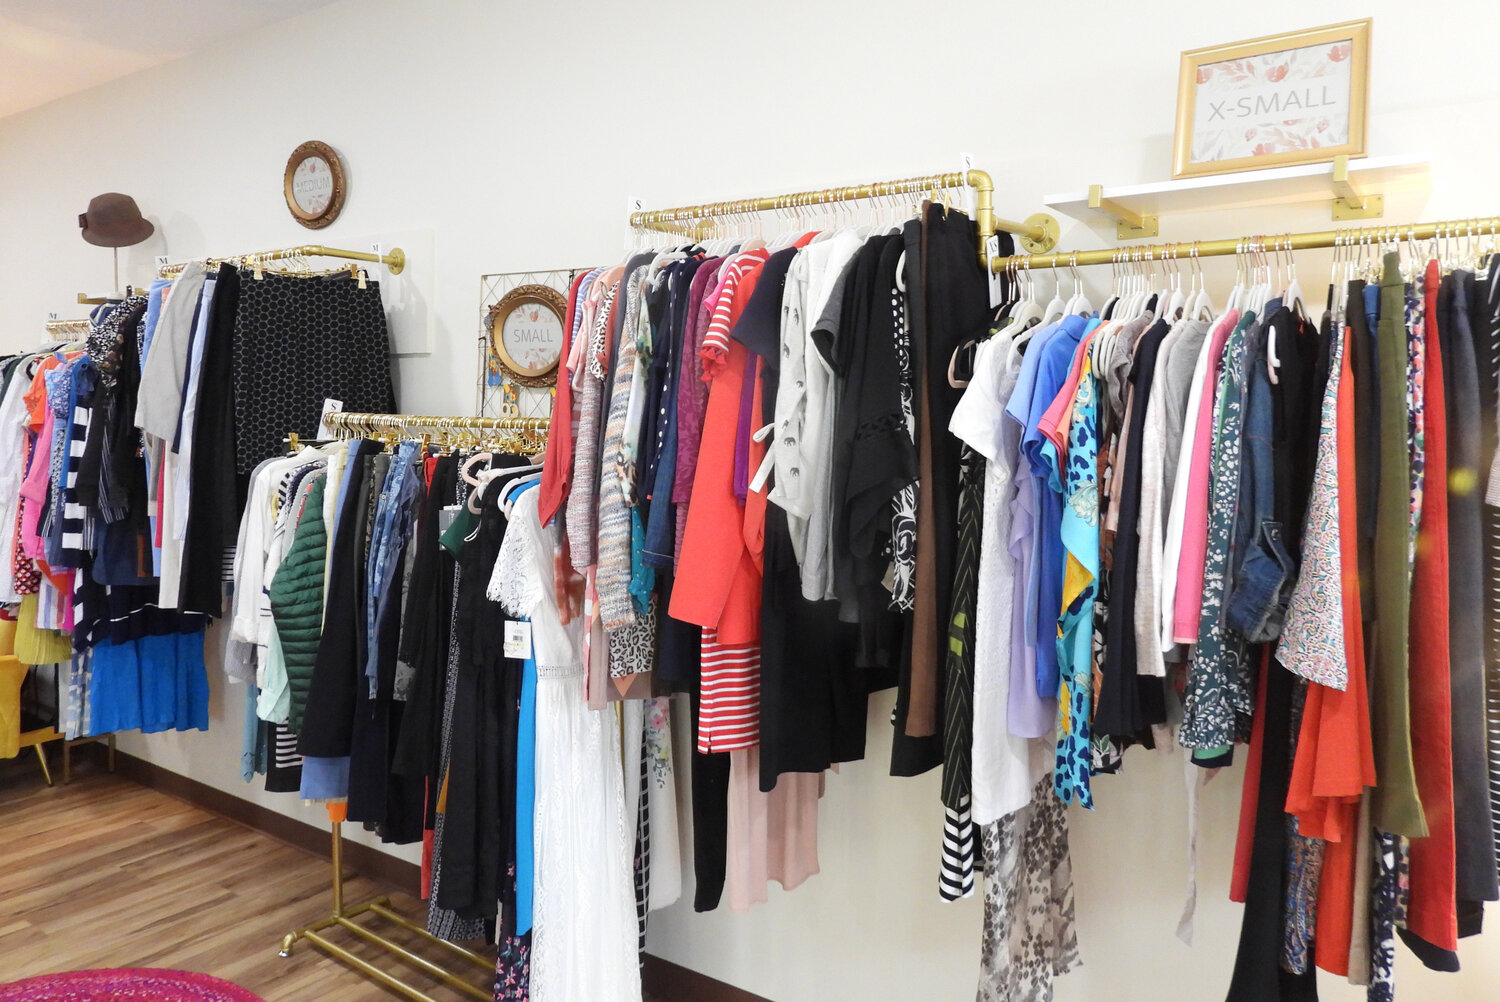 Worthy is a premium and designer resale boutique that offers women's clothing, jewelry, and accessories of all kinds.